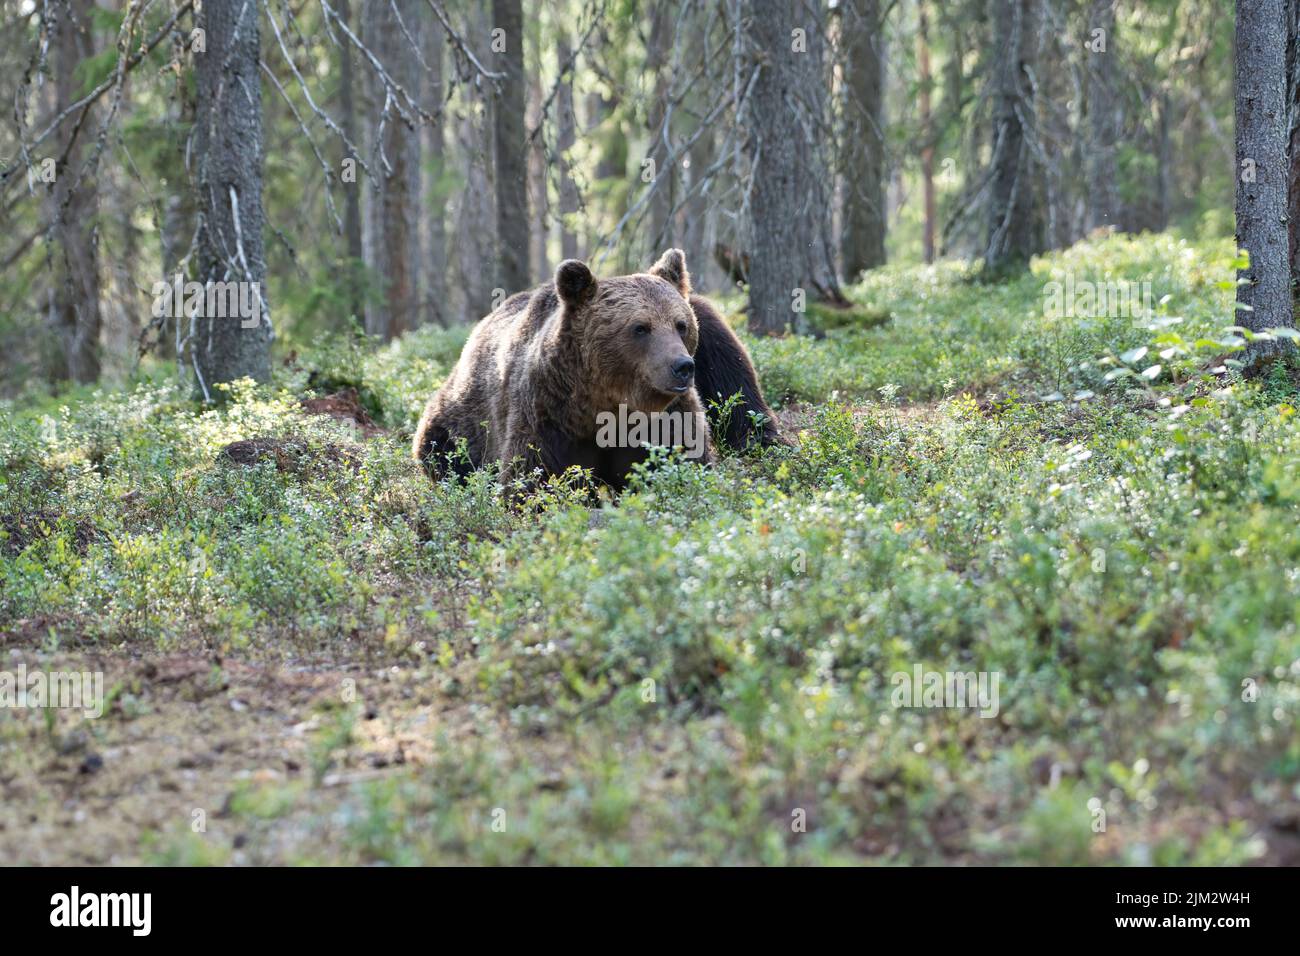 Brown bear (Ursus arctos) in the taiga forest of Finland Stock Photo